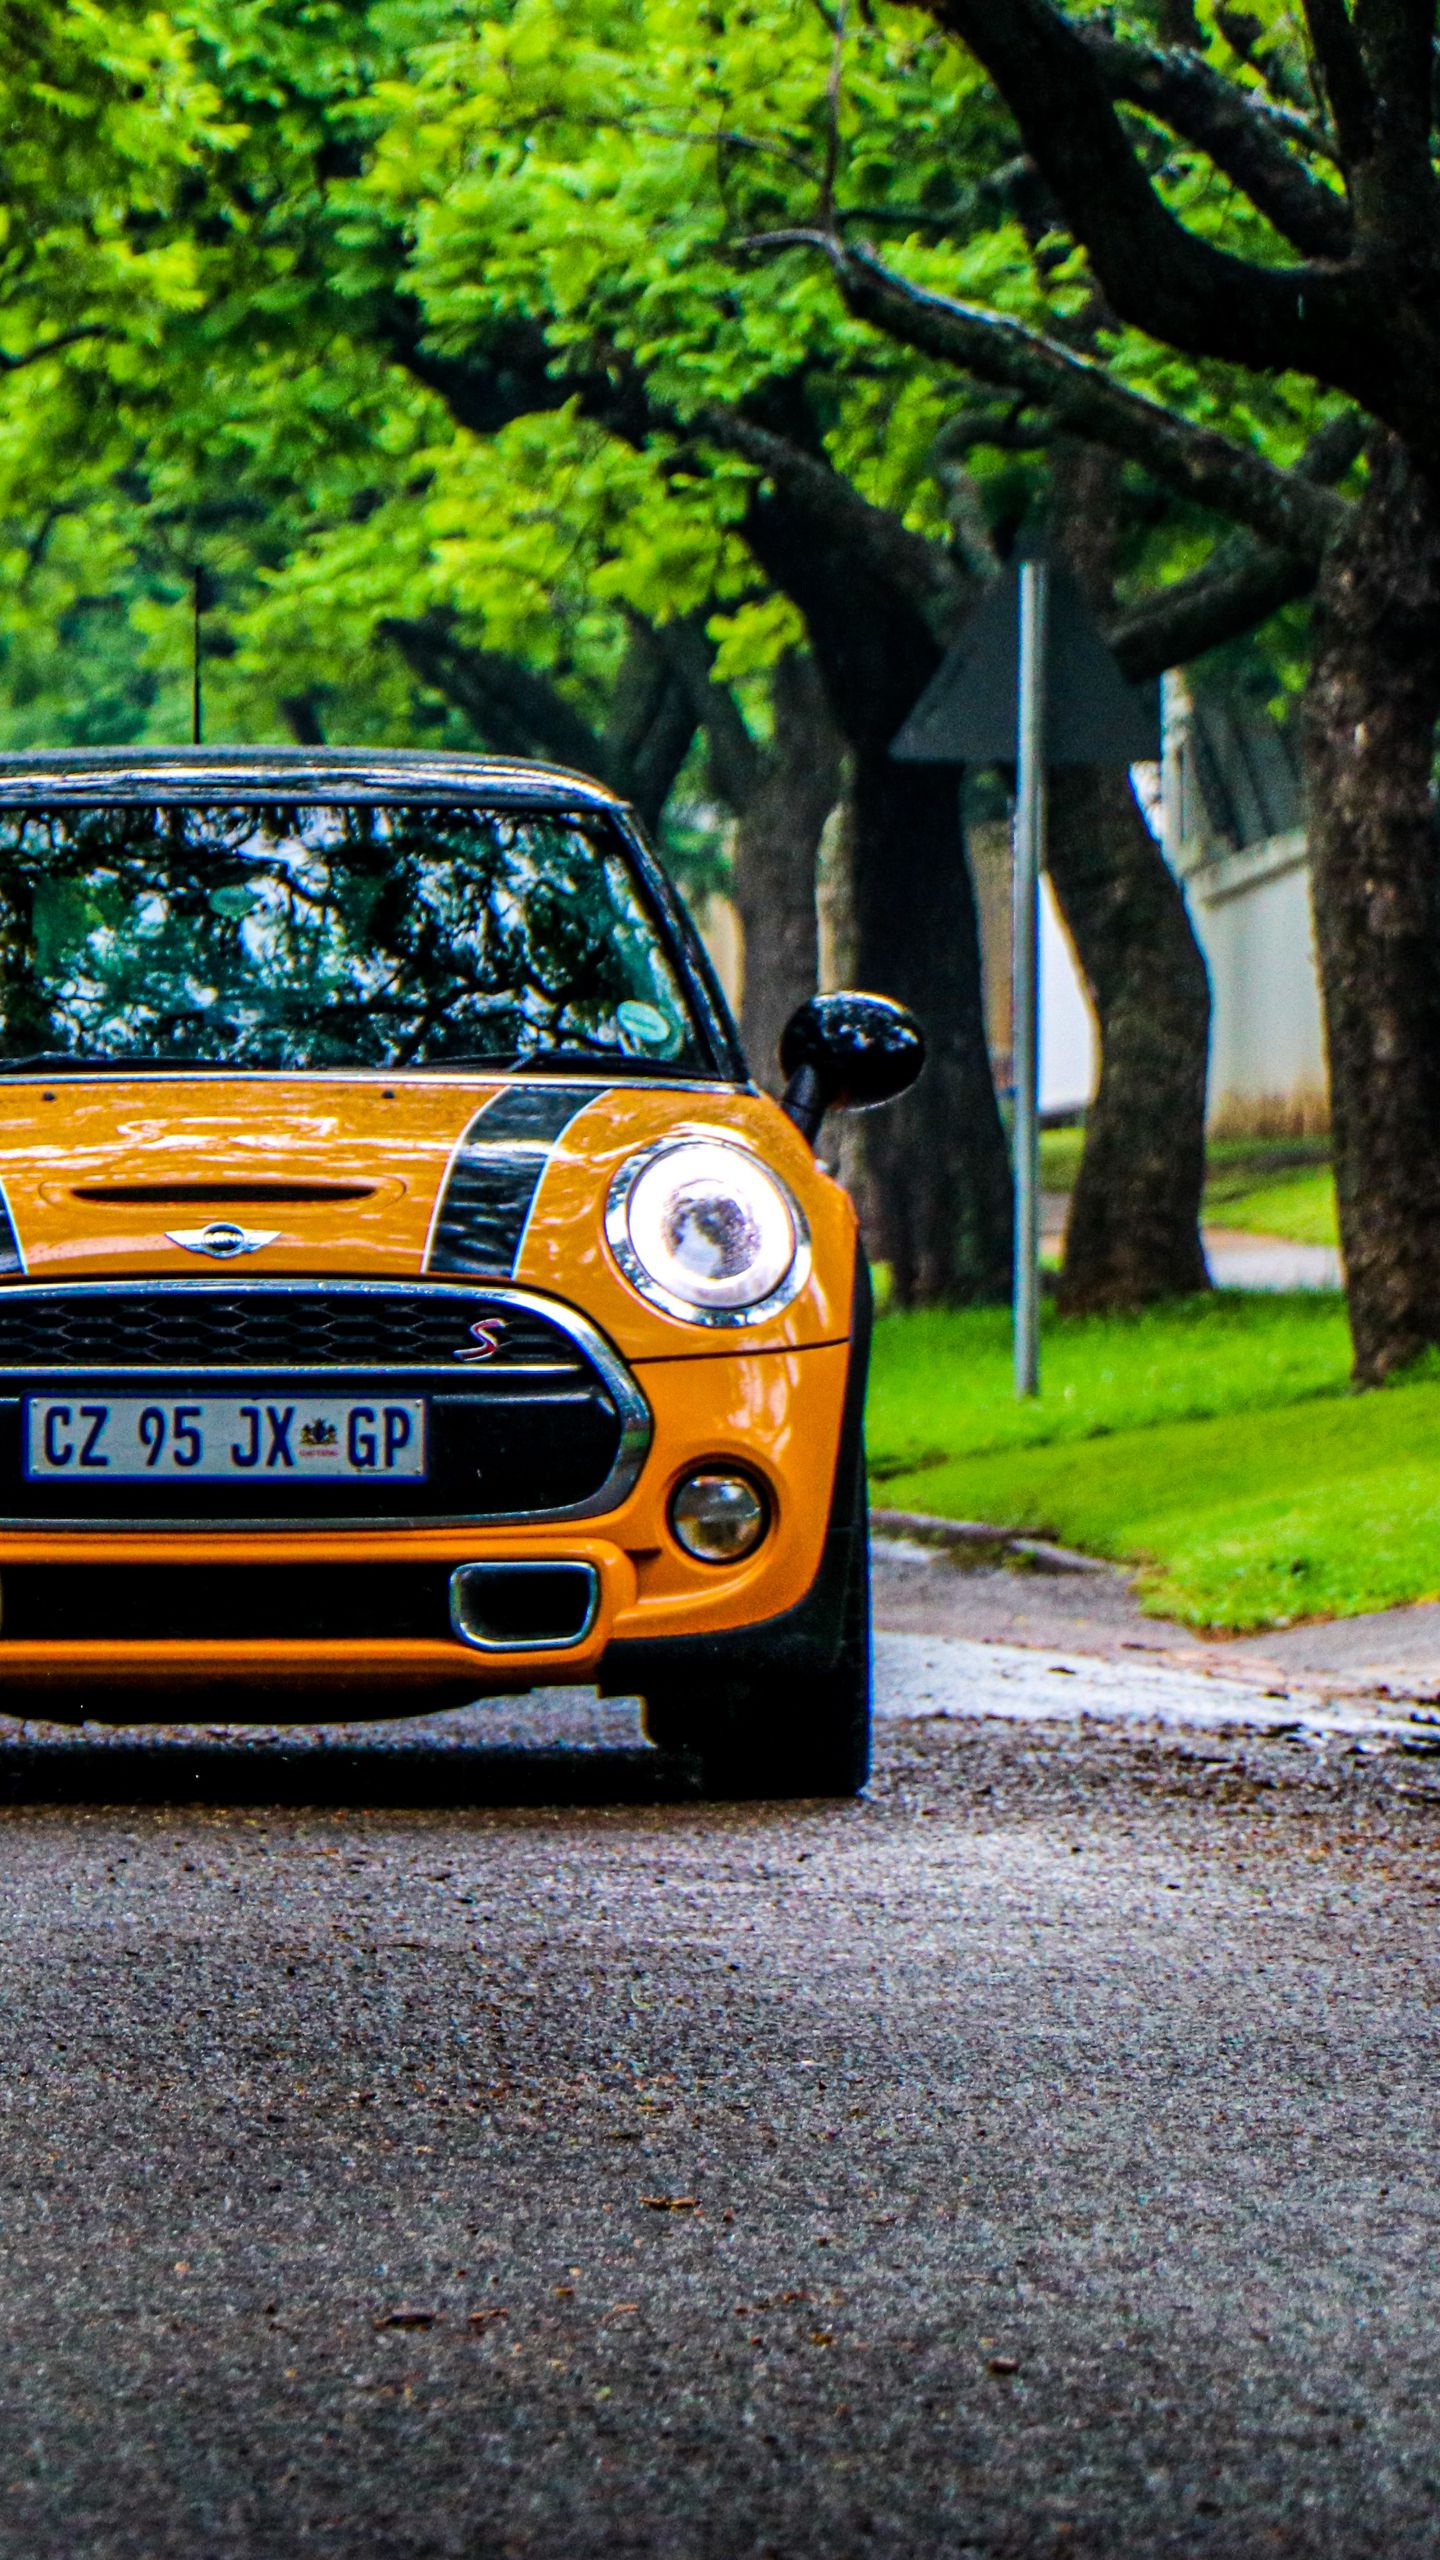 MINI Cooper Wallpapers 78 images inside